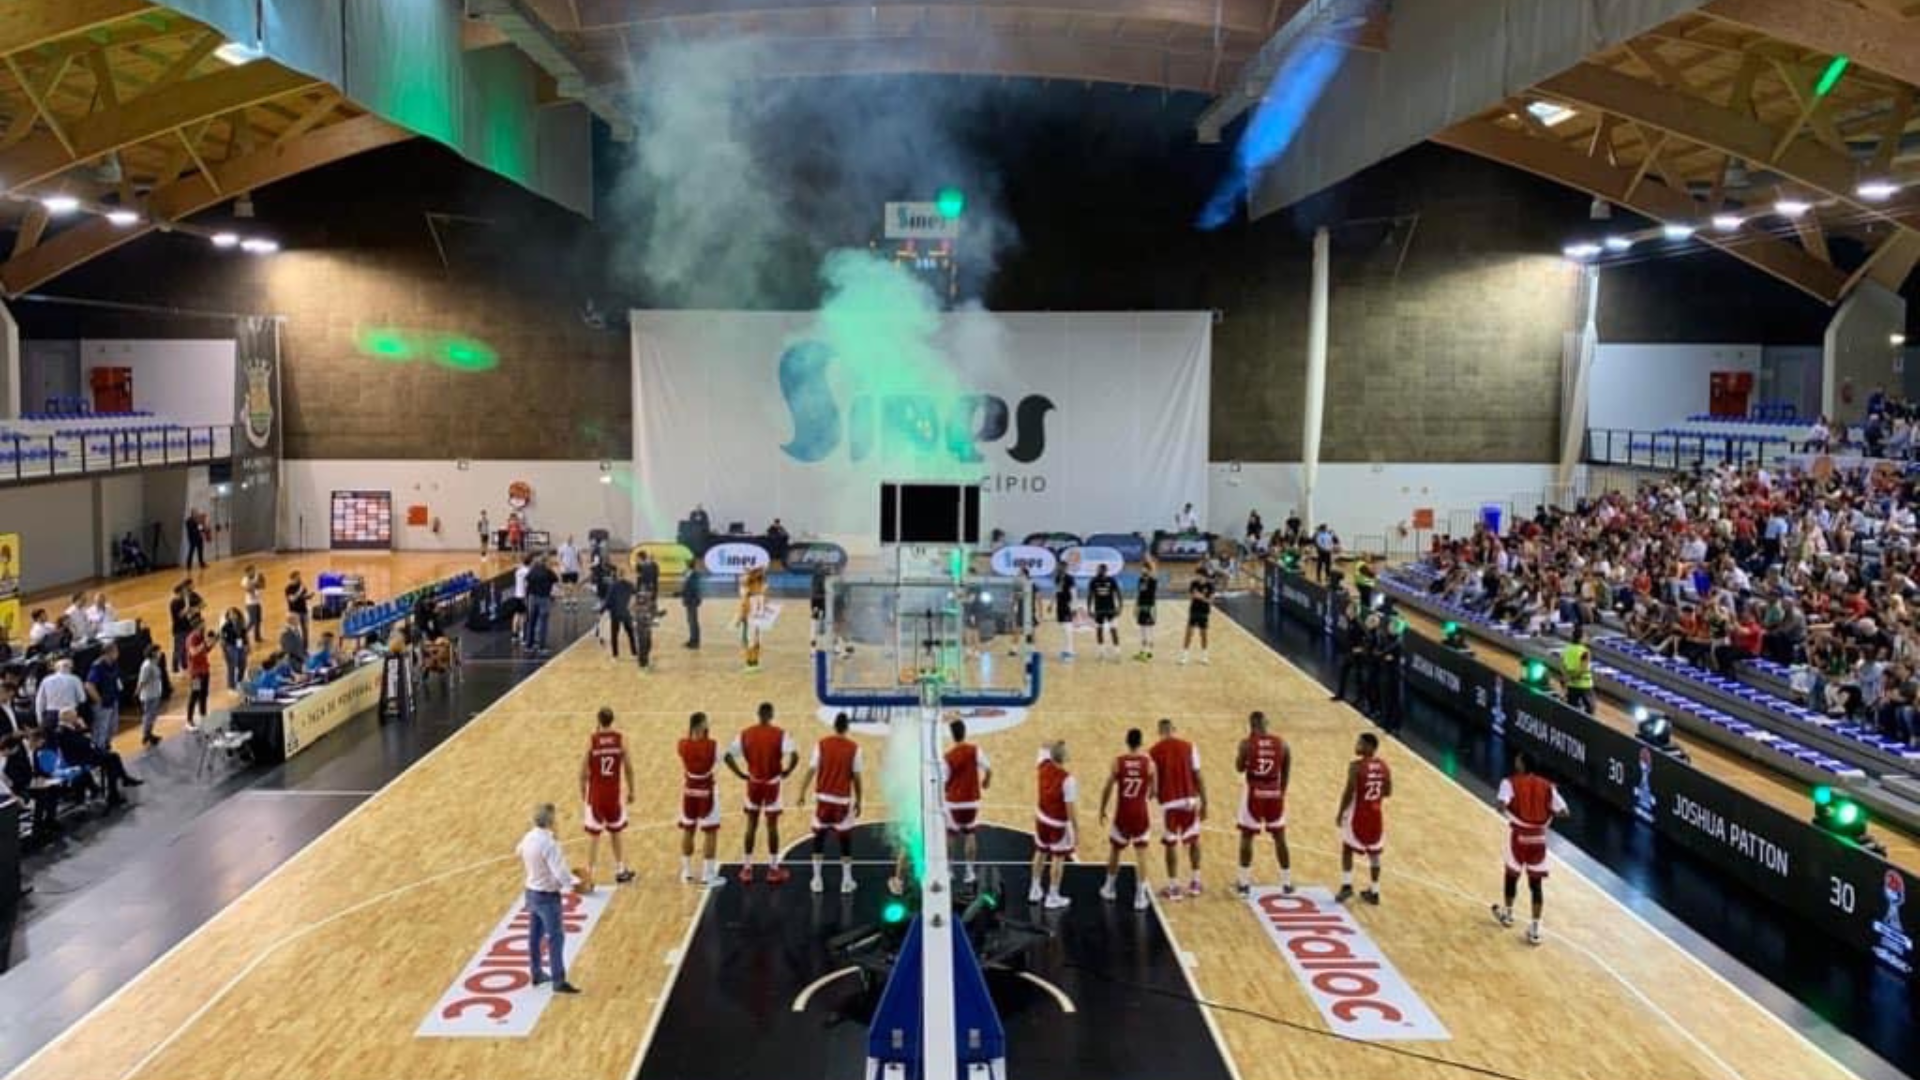 2023 FPB Basketball Cup Final-Four